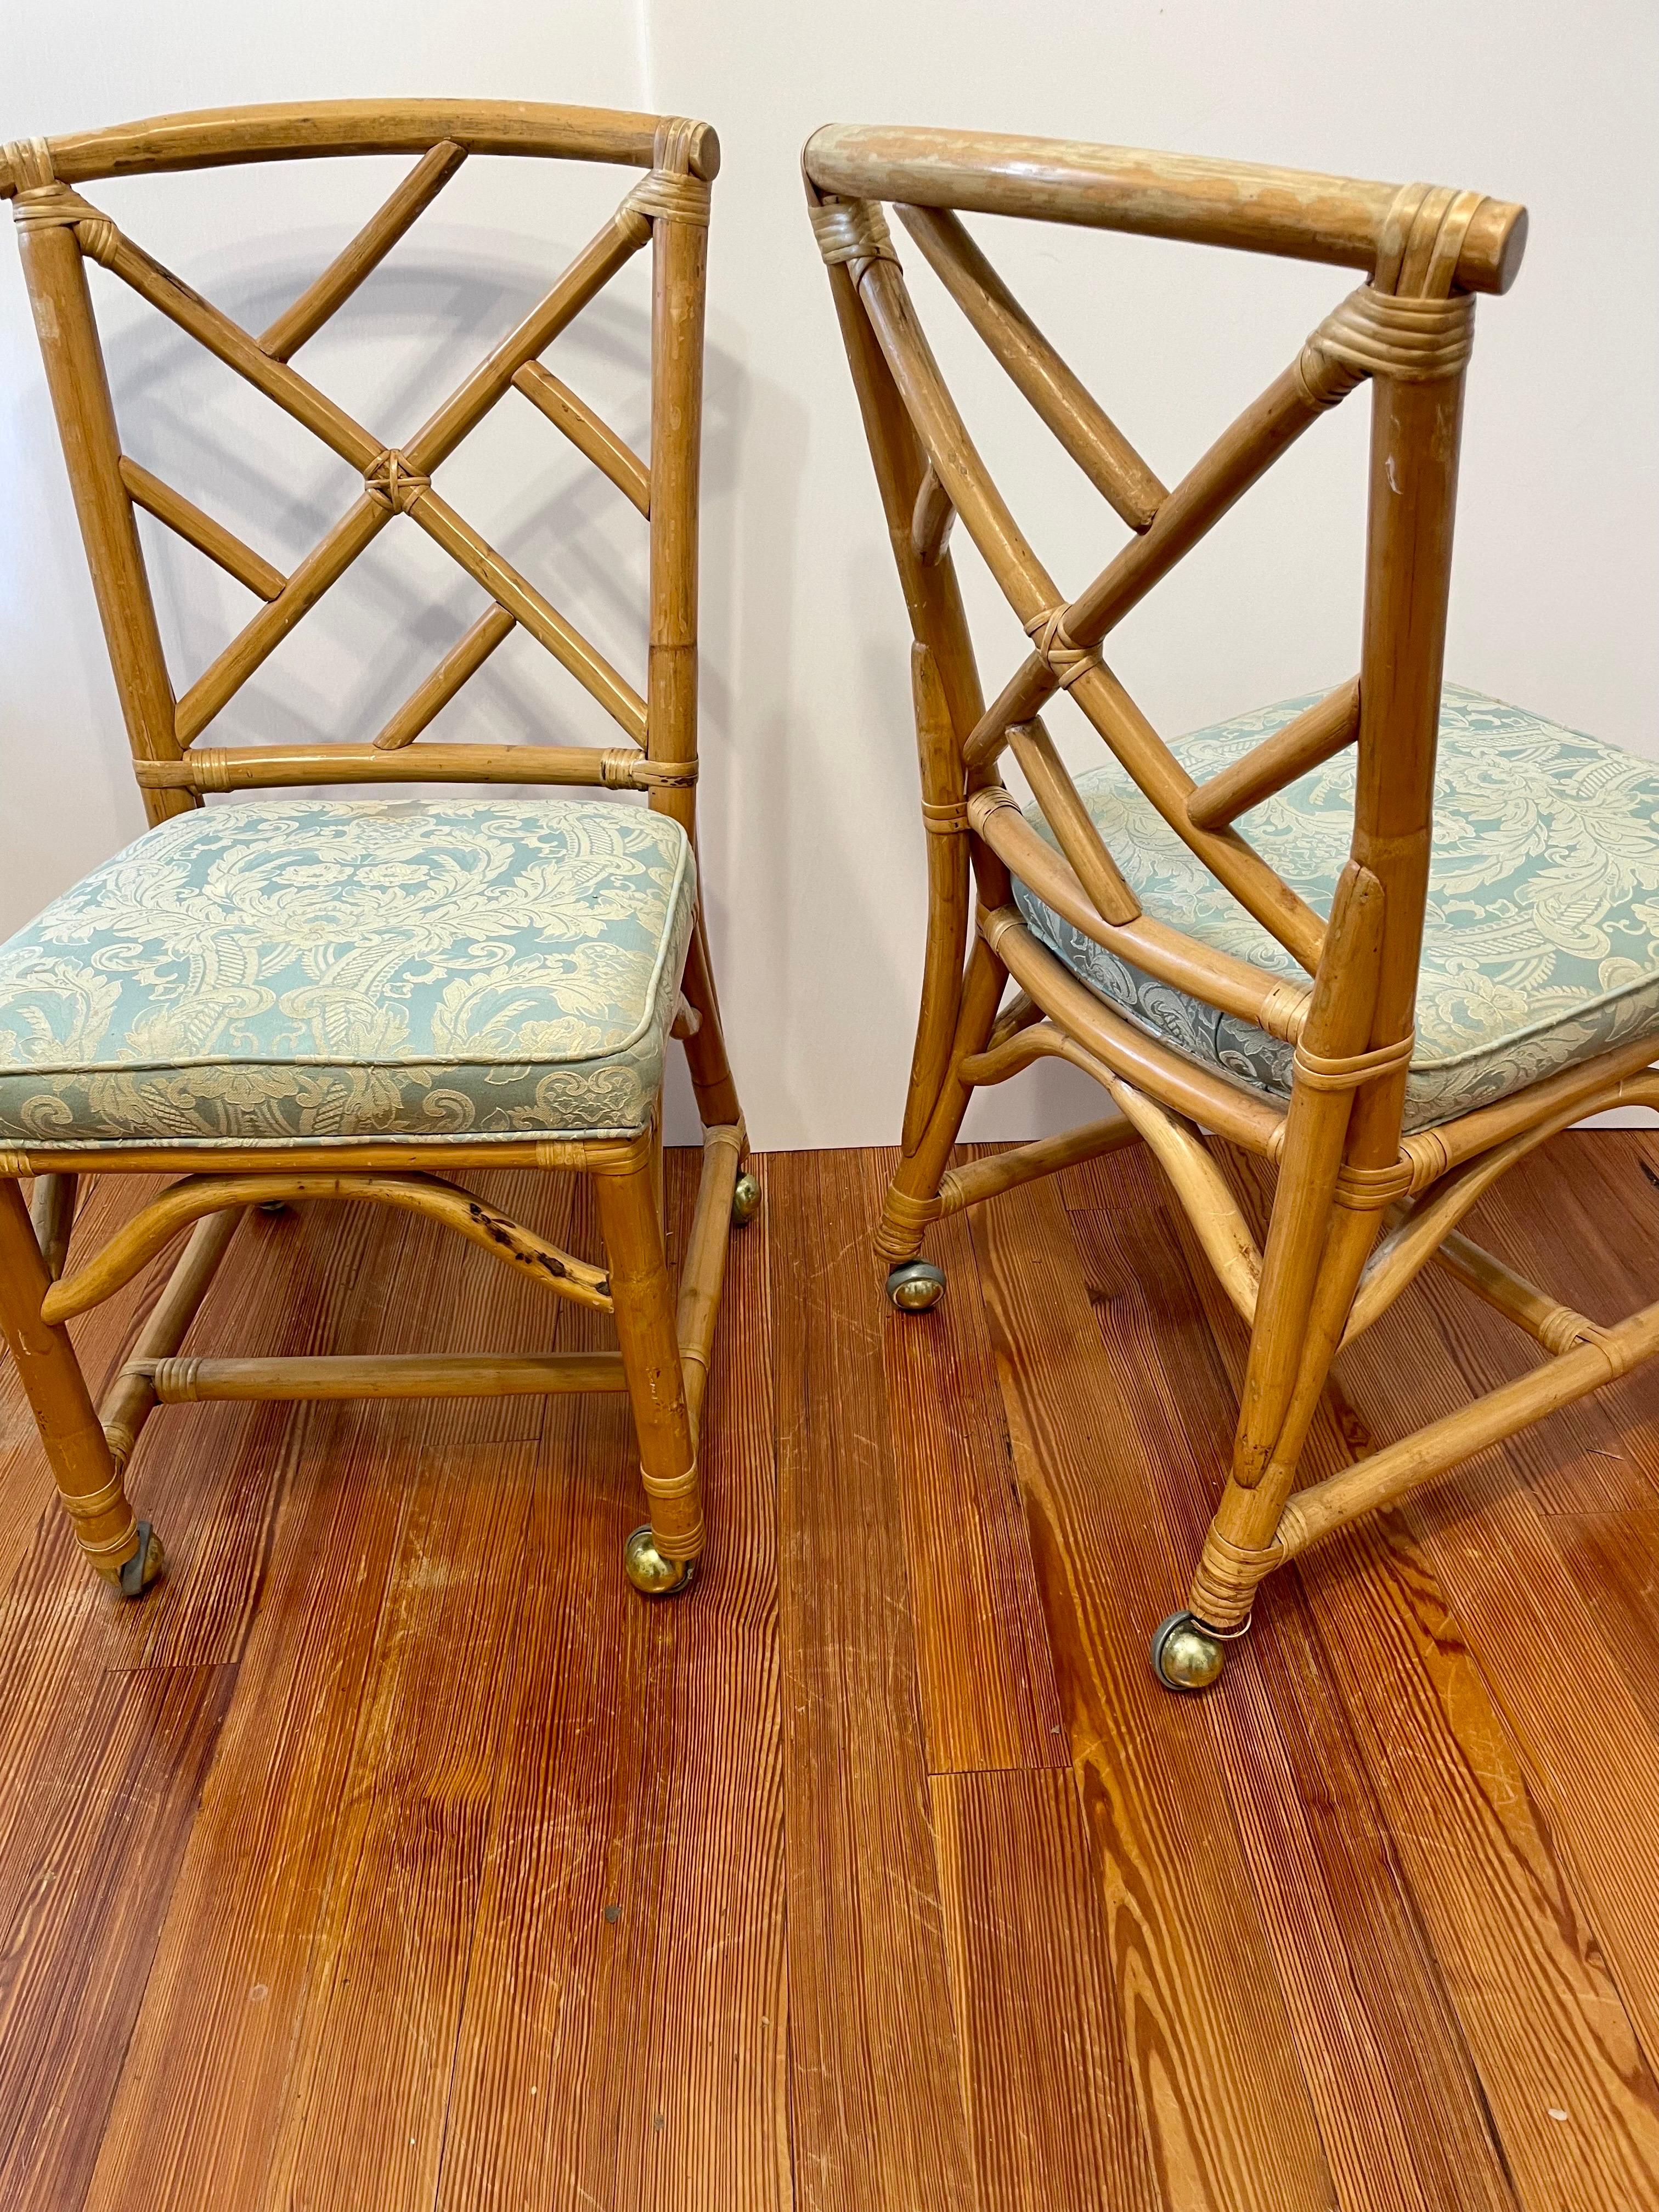 Pair of Rattan Bamboo side chairs on casters with upholstered seats. Good overall vintage condition, with some wear to finish and upholstery. Seats remove easily for re upholstery which should be done due to some wear and stains.